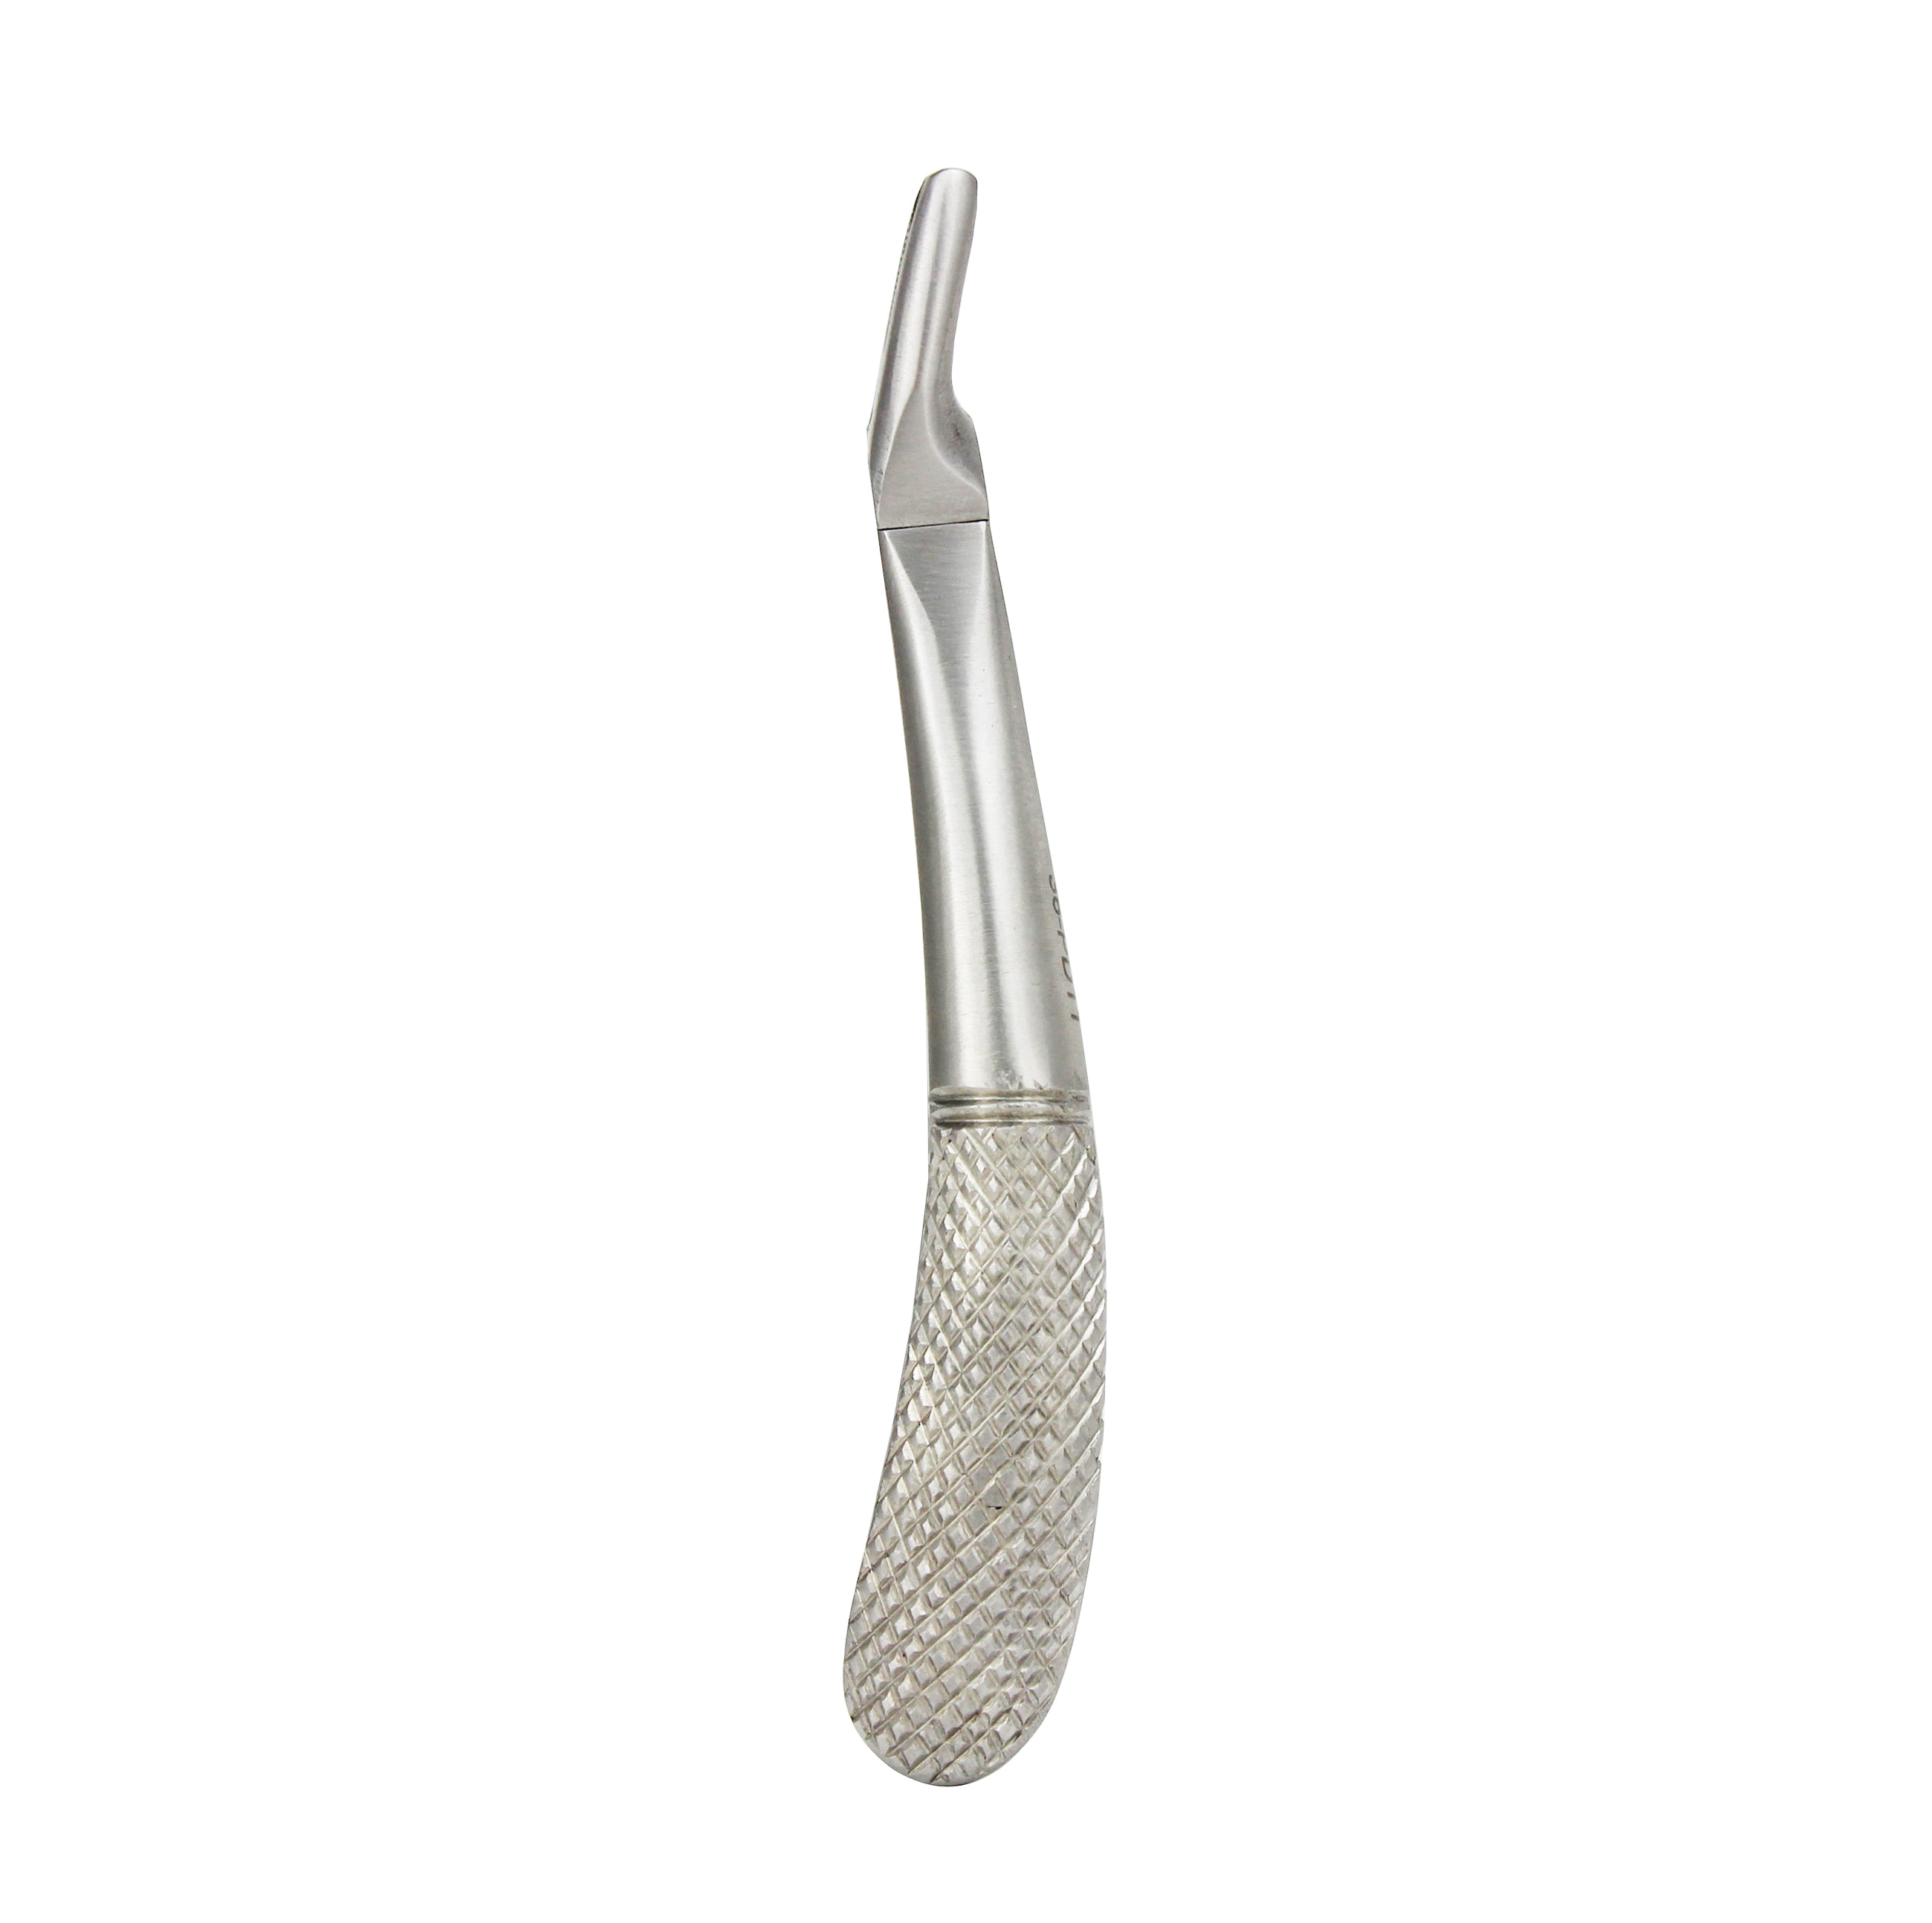 Extraction Forceps PD11, Pediatric